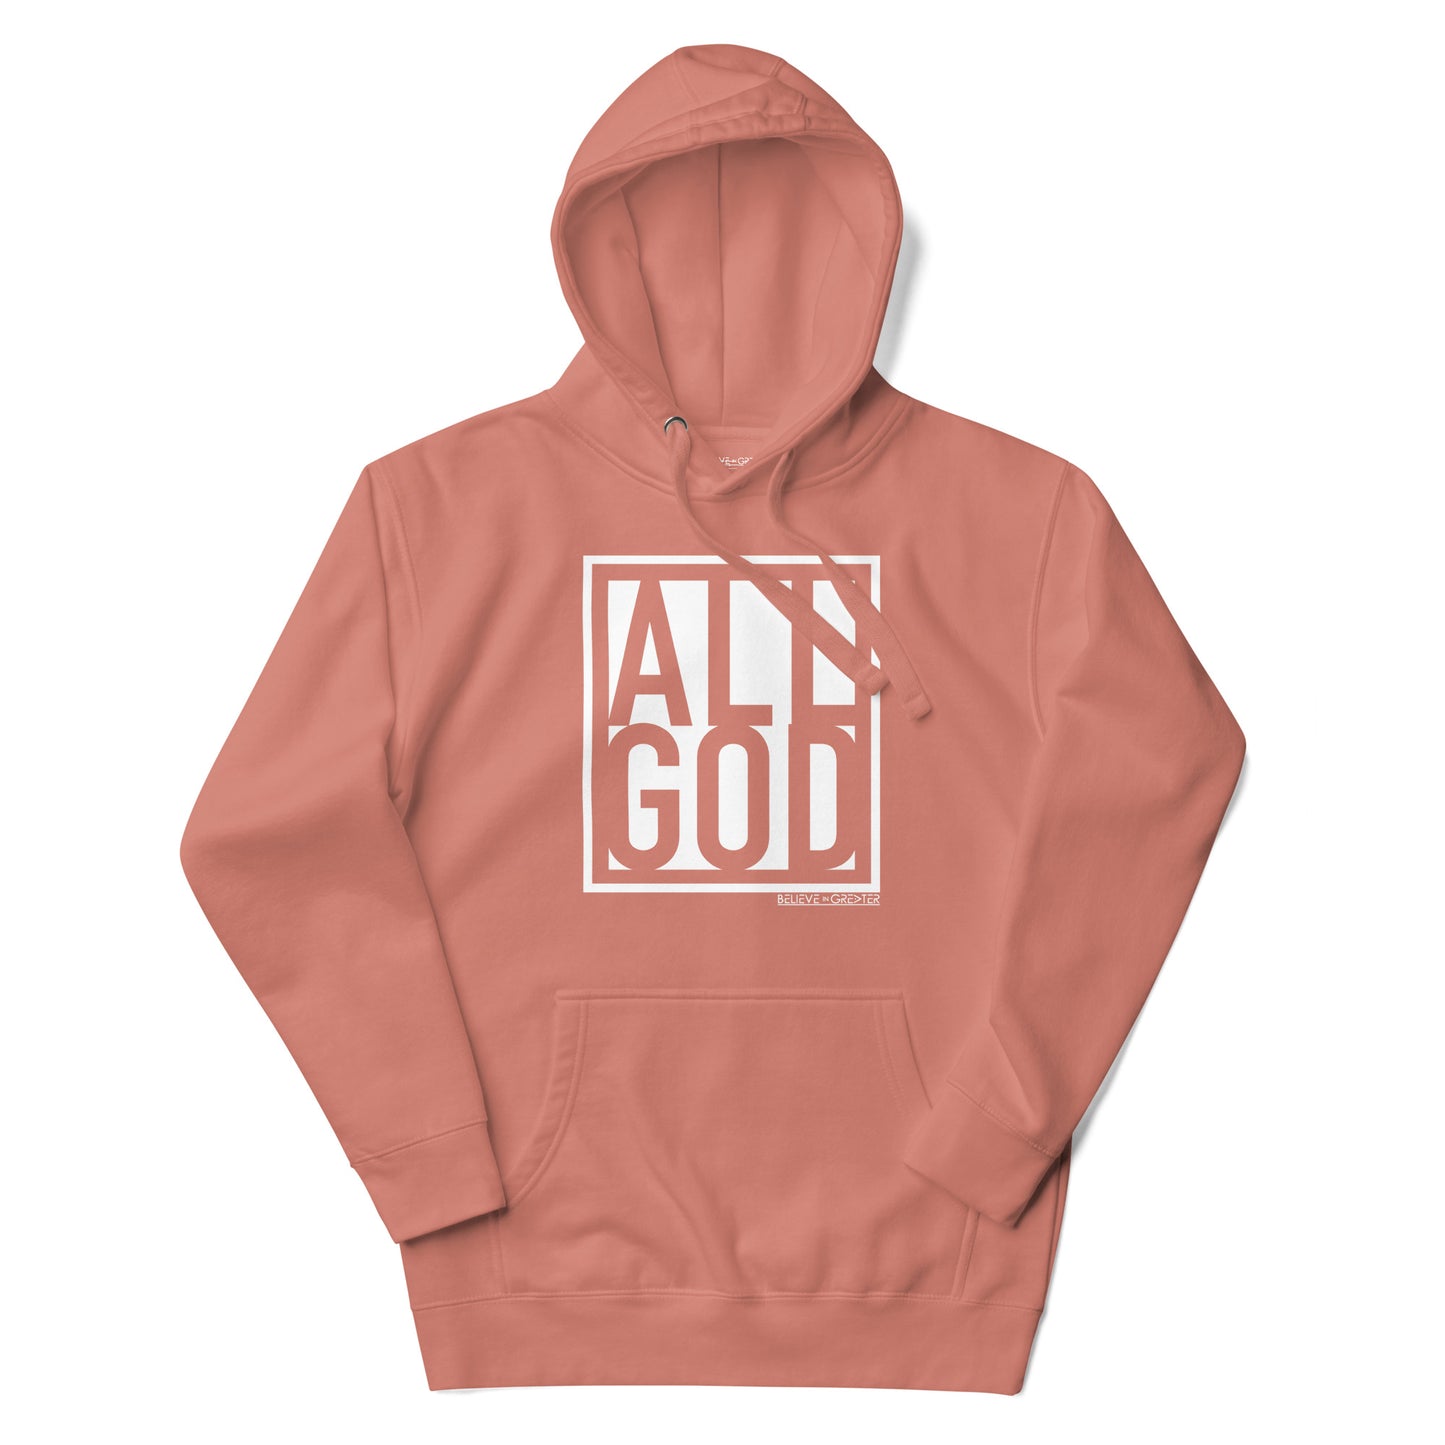 All God Dusty Rose and White Unisex Hoodie